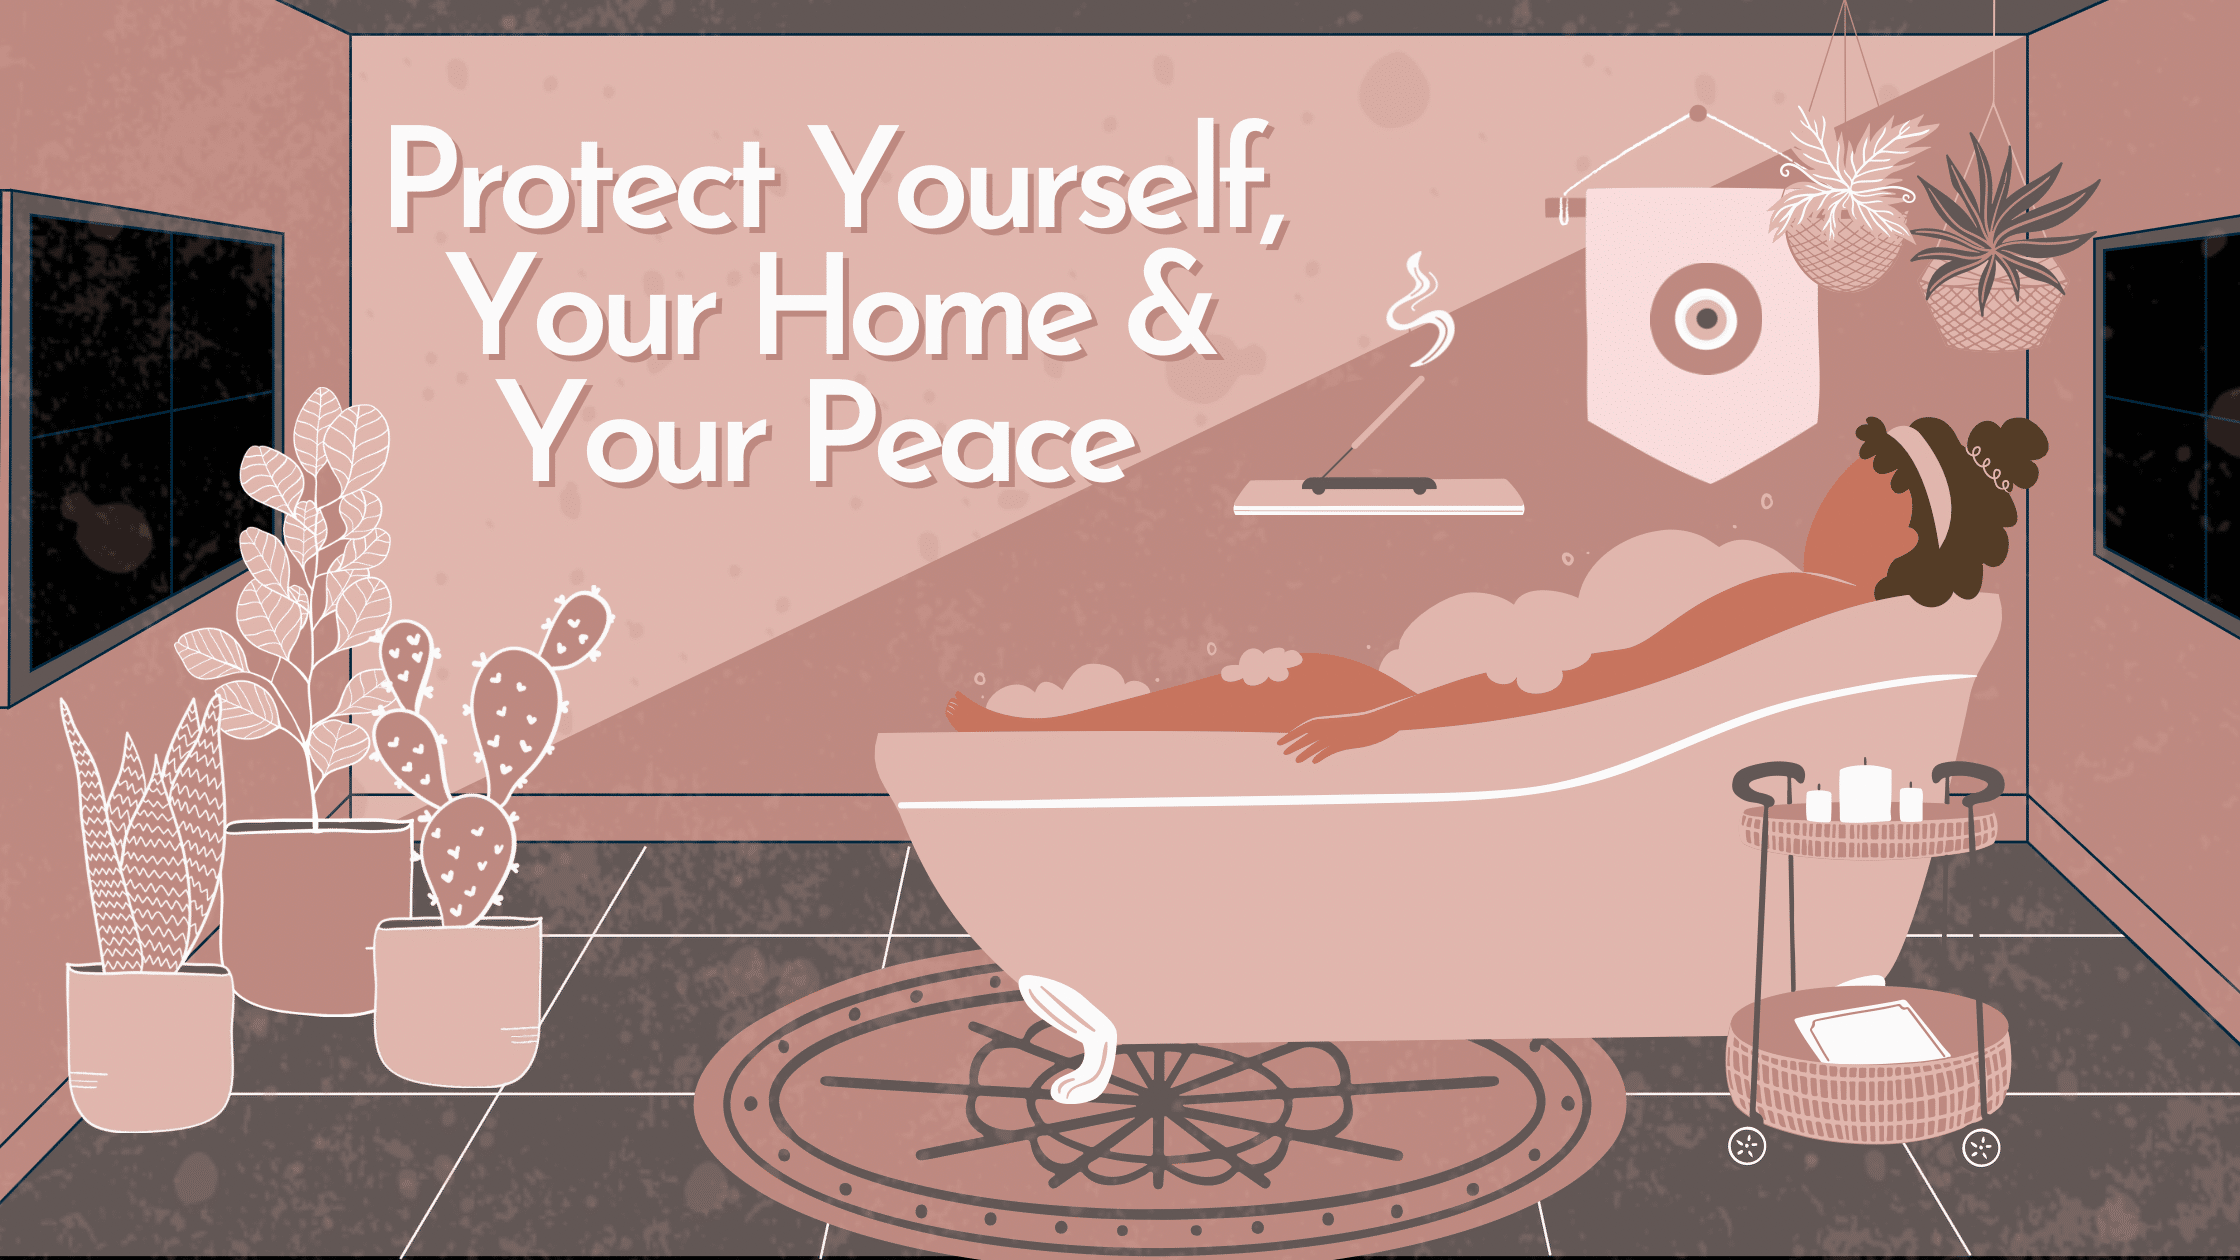 Protect yourself your home and your peace